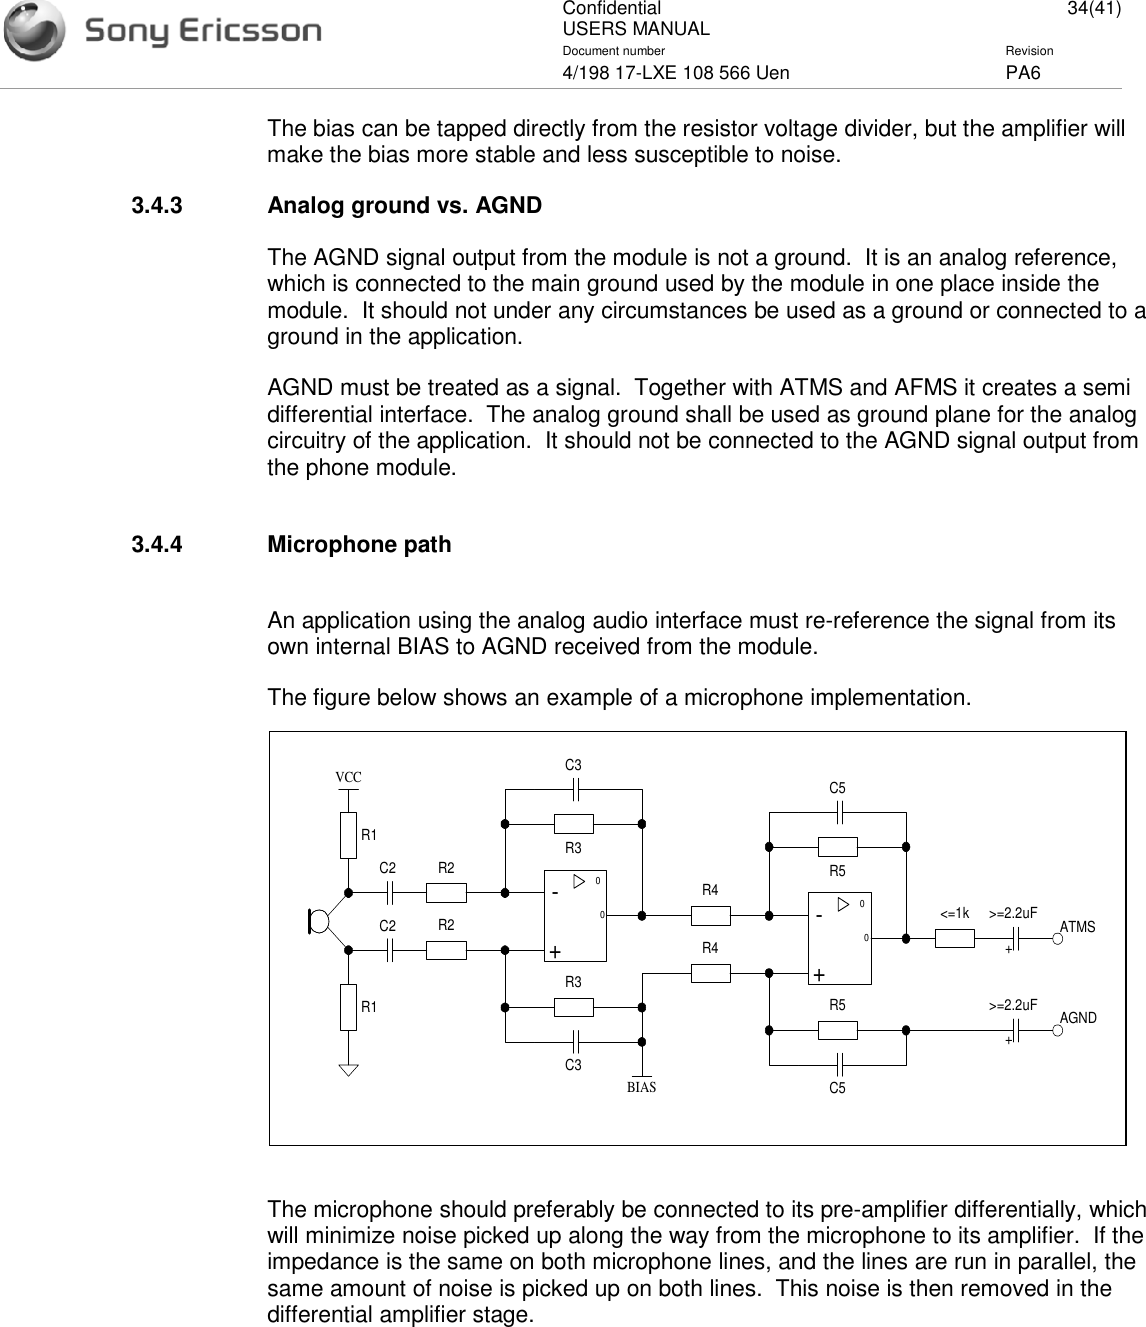 ConfidentialUSERS MANUAL 34(41)Document number Revision4/198 17-LXE 108 566 Uen PA6The bias can be tapped directly from the resistor voltage divider, but the amplifier willmake the bias more stable and less susceptible to noise.3.4.3 Analog ground vs. AGNDThe AGND signal output from the module is not a ground. It is an analog reference,which is connected to the main ground used by the module in one place inside themodule. It should not under any circumstances be used as a ground or connected to aground in the application.AGND must be treated as a signal. Together with ATMS and AFMS it creates a semidifferential interface. The analog ground shall be used as ground plane for the analogcircuitry of the application. It should not be connected to the AGND signal output fromthe phone module.3.4.4 Microphone pathAn application using the analog audio interface must re-reference the signal from itsown internal BIAS to AGND received from the module.The figure below shows an example of a microphone implementation.The microphone should preferably be connected to its pre-amplifier differentially, whichwill minimize noise picked up along the way from the microphone to its amplifier. If theimpedance is the same on both microphone lines, and the lines are run in parallel, thesame amount of noise is picked up on both lines. This noise is then removed in thedifferential amplifier stage.0-+0R2R2R3R3R1R1VCCC2C2C3C30-+0R4R4R5R5C5C5&lt;=1kBIAS&gt;=2.2uF ATMSAGND&gt;=2.2uF++